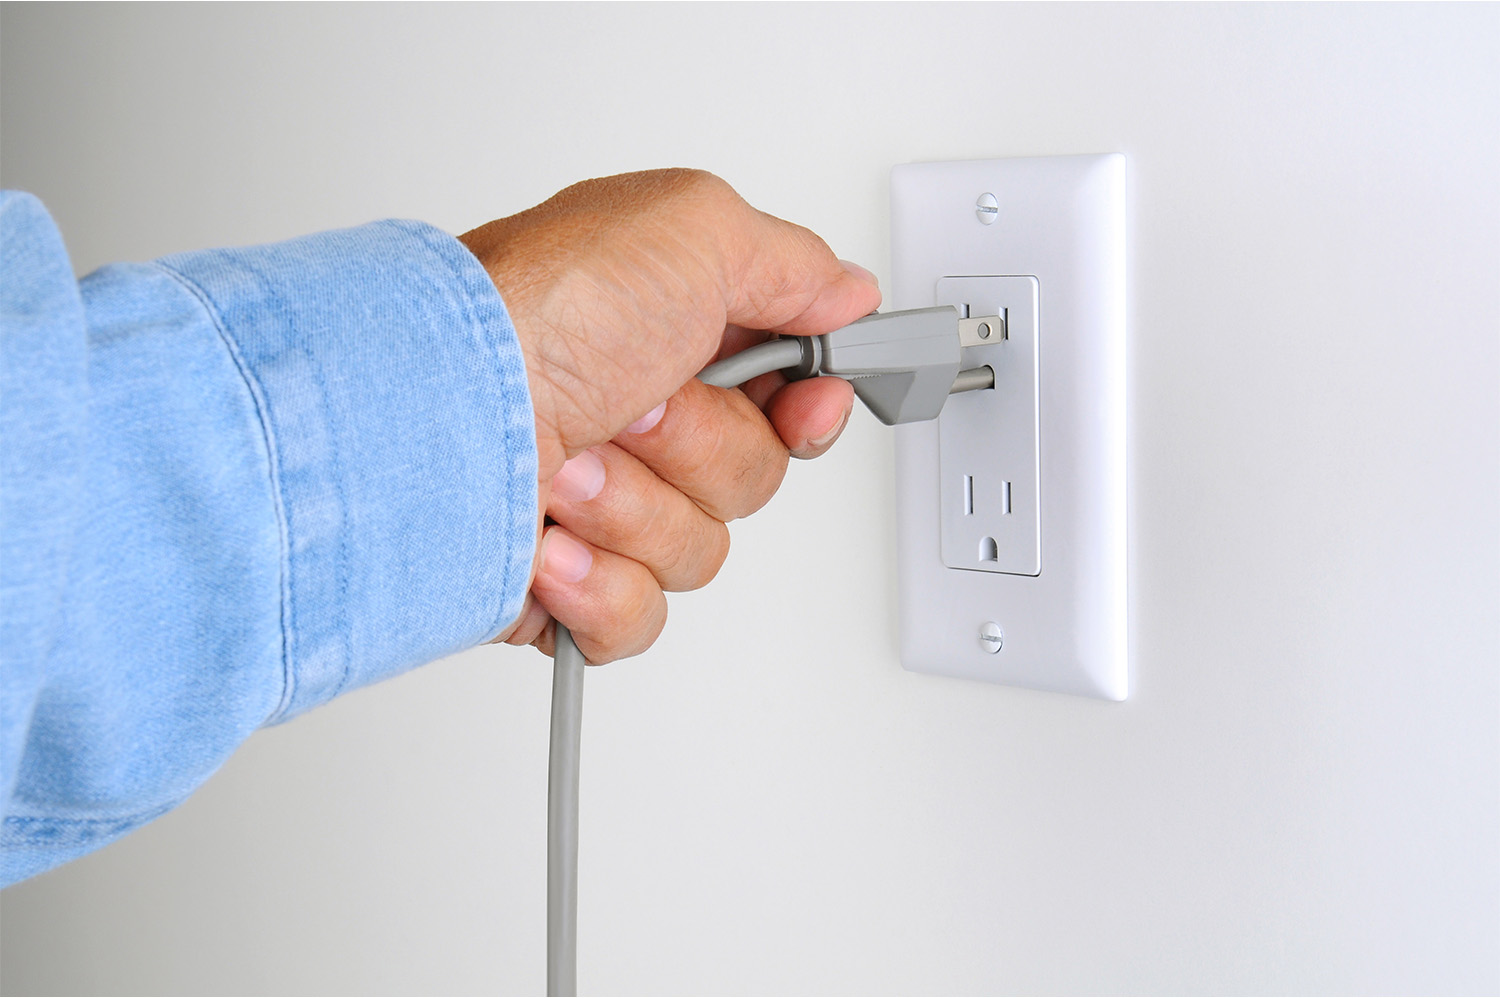 A person plugging a three pronged grey plug into an outlet.